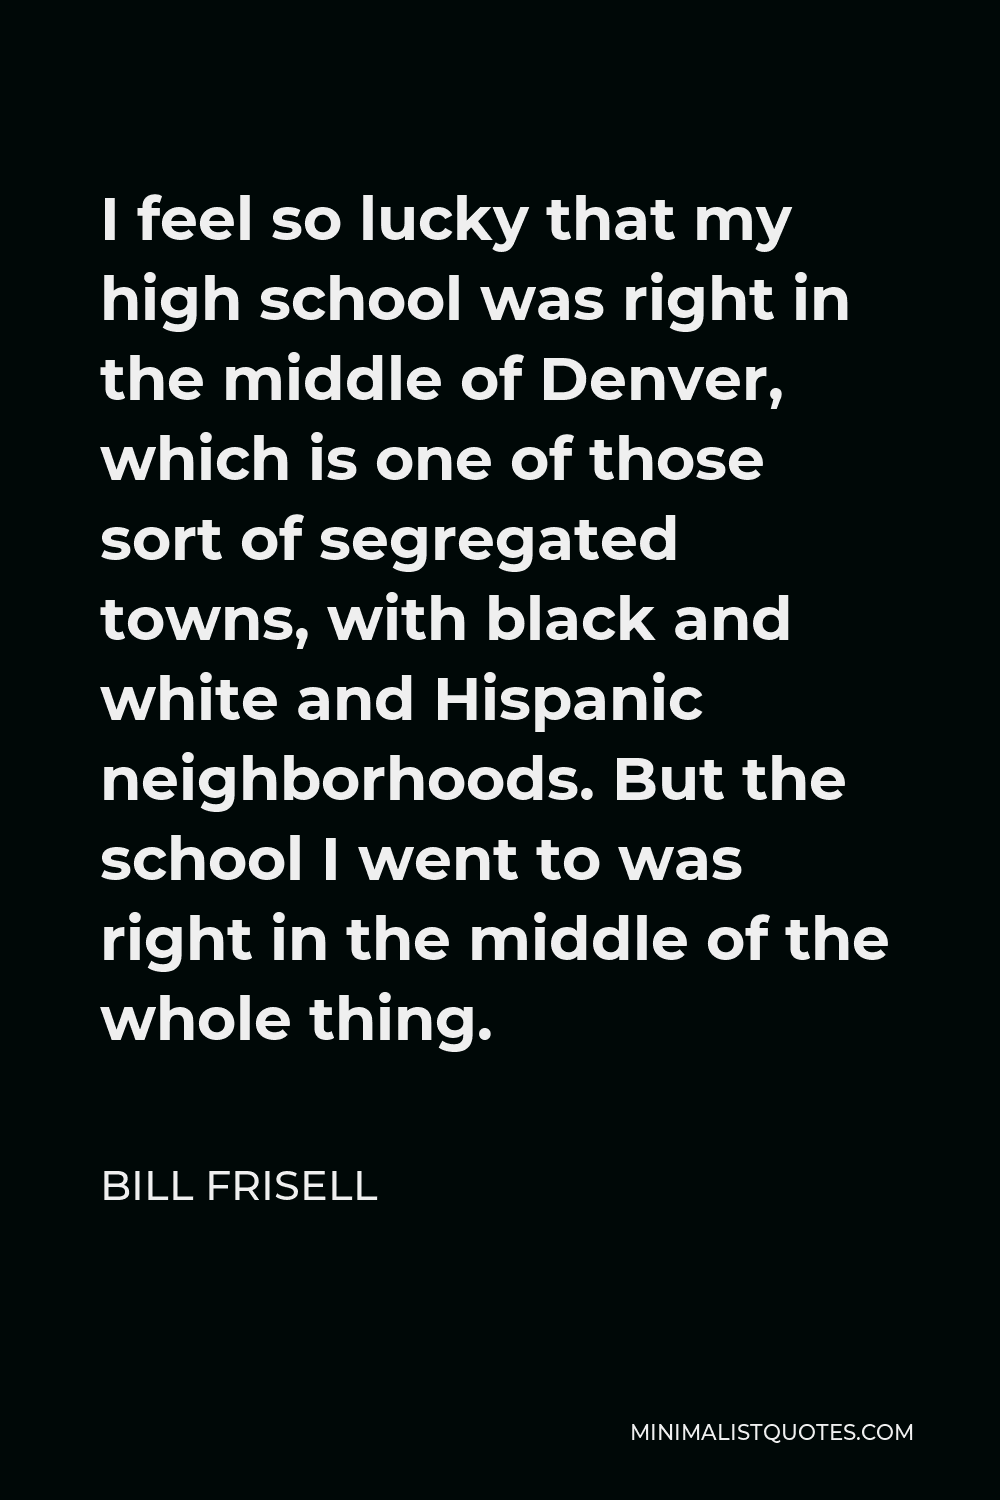 Bill Frisell Quote - I feel so lucky that my high school was right in the middle of Denver, which is one of those sort of segregated towns, with black and white and Hispanic neighborhoods. But the school I went to was right in the middle of the whole thing.